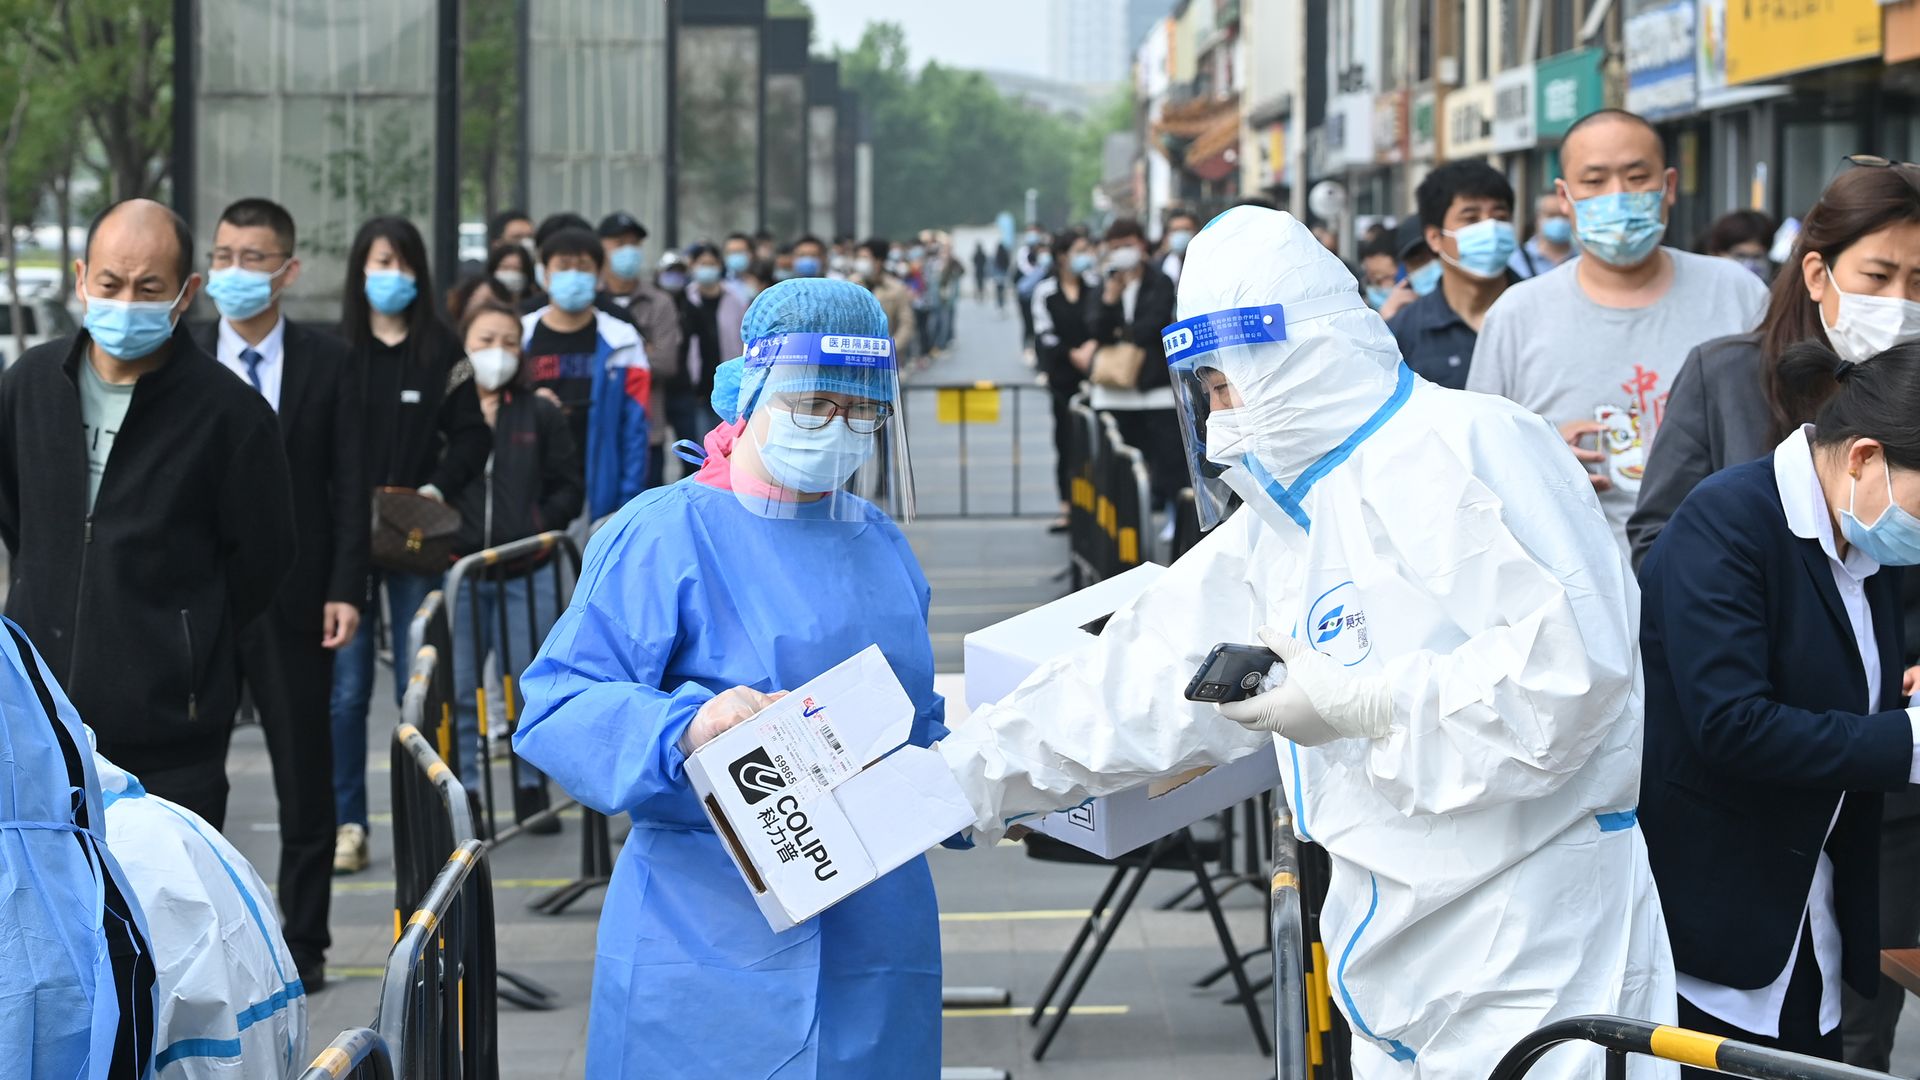 People queue up at a COVID-19 nucleic acid testing site in Beijing